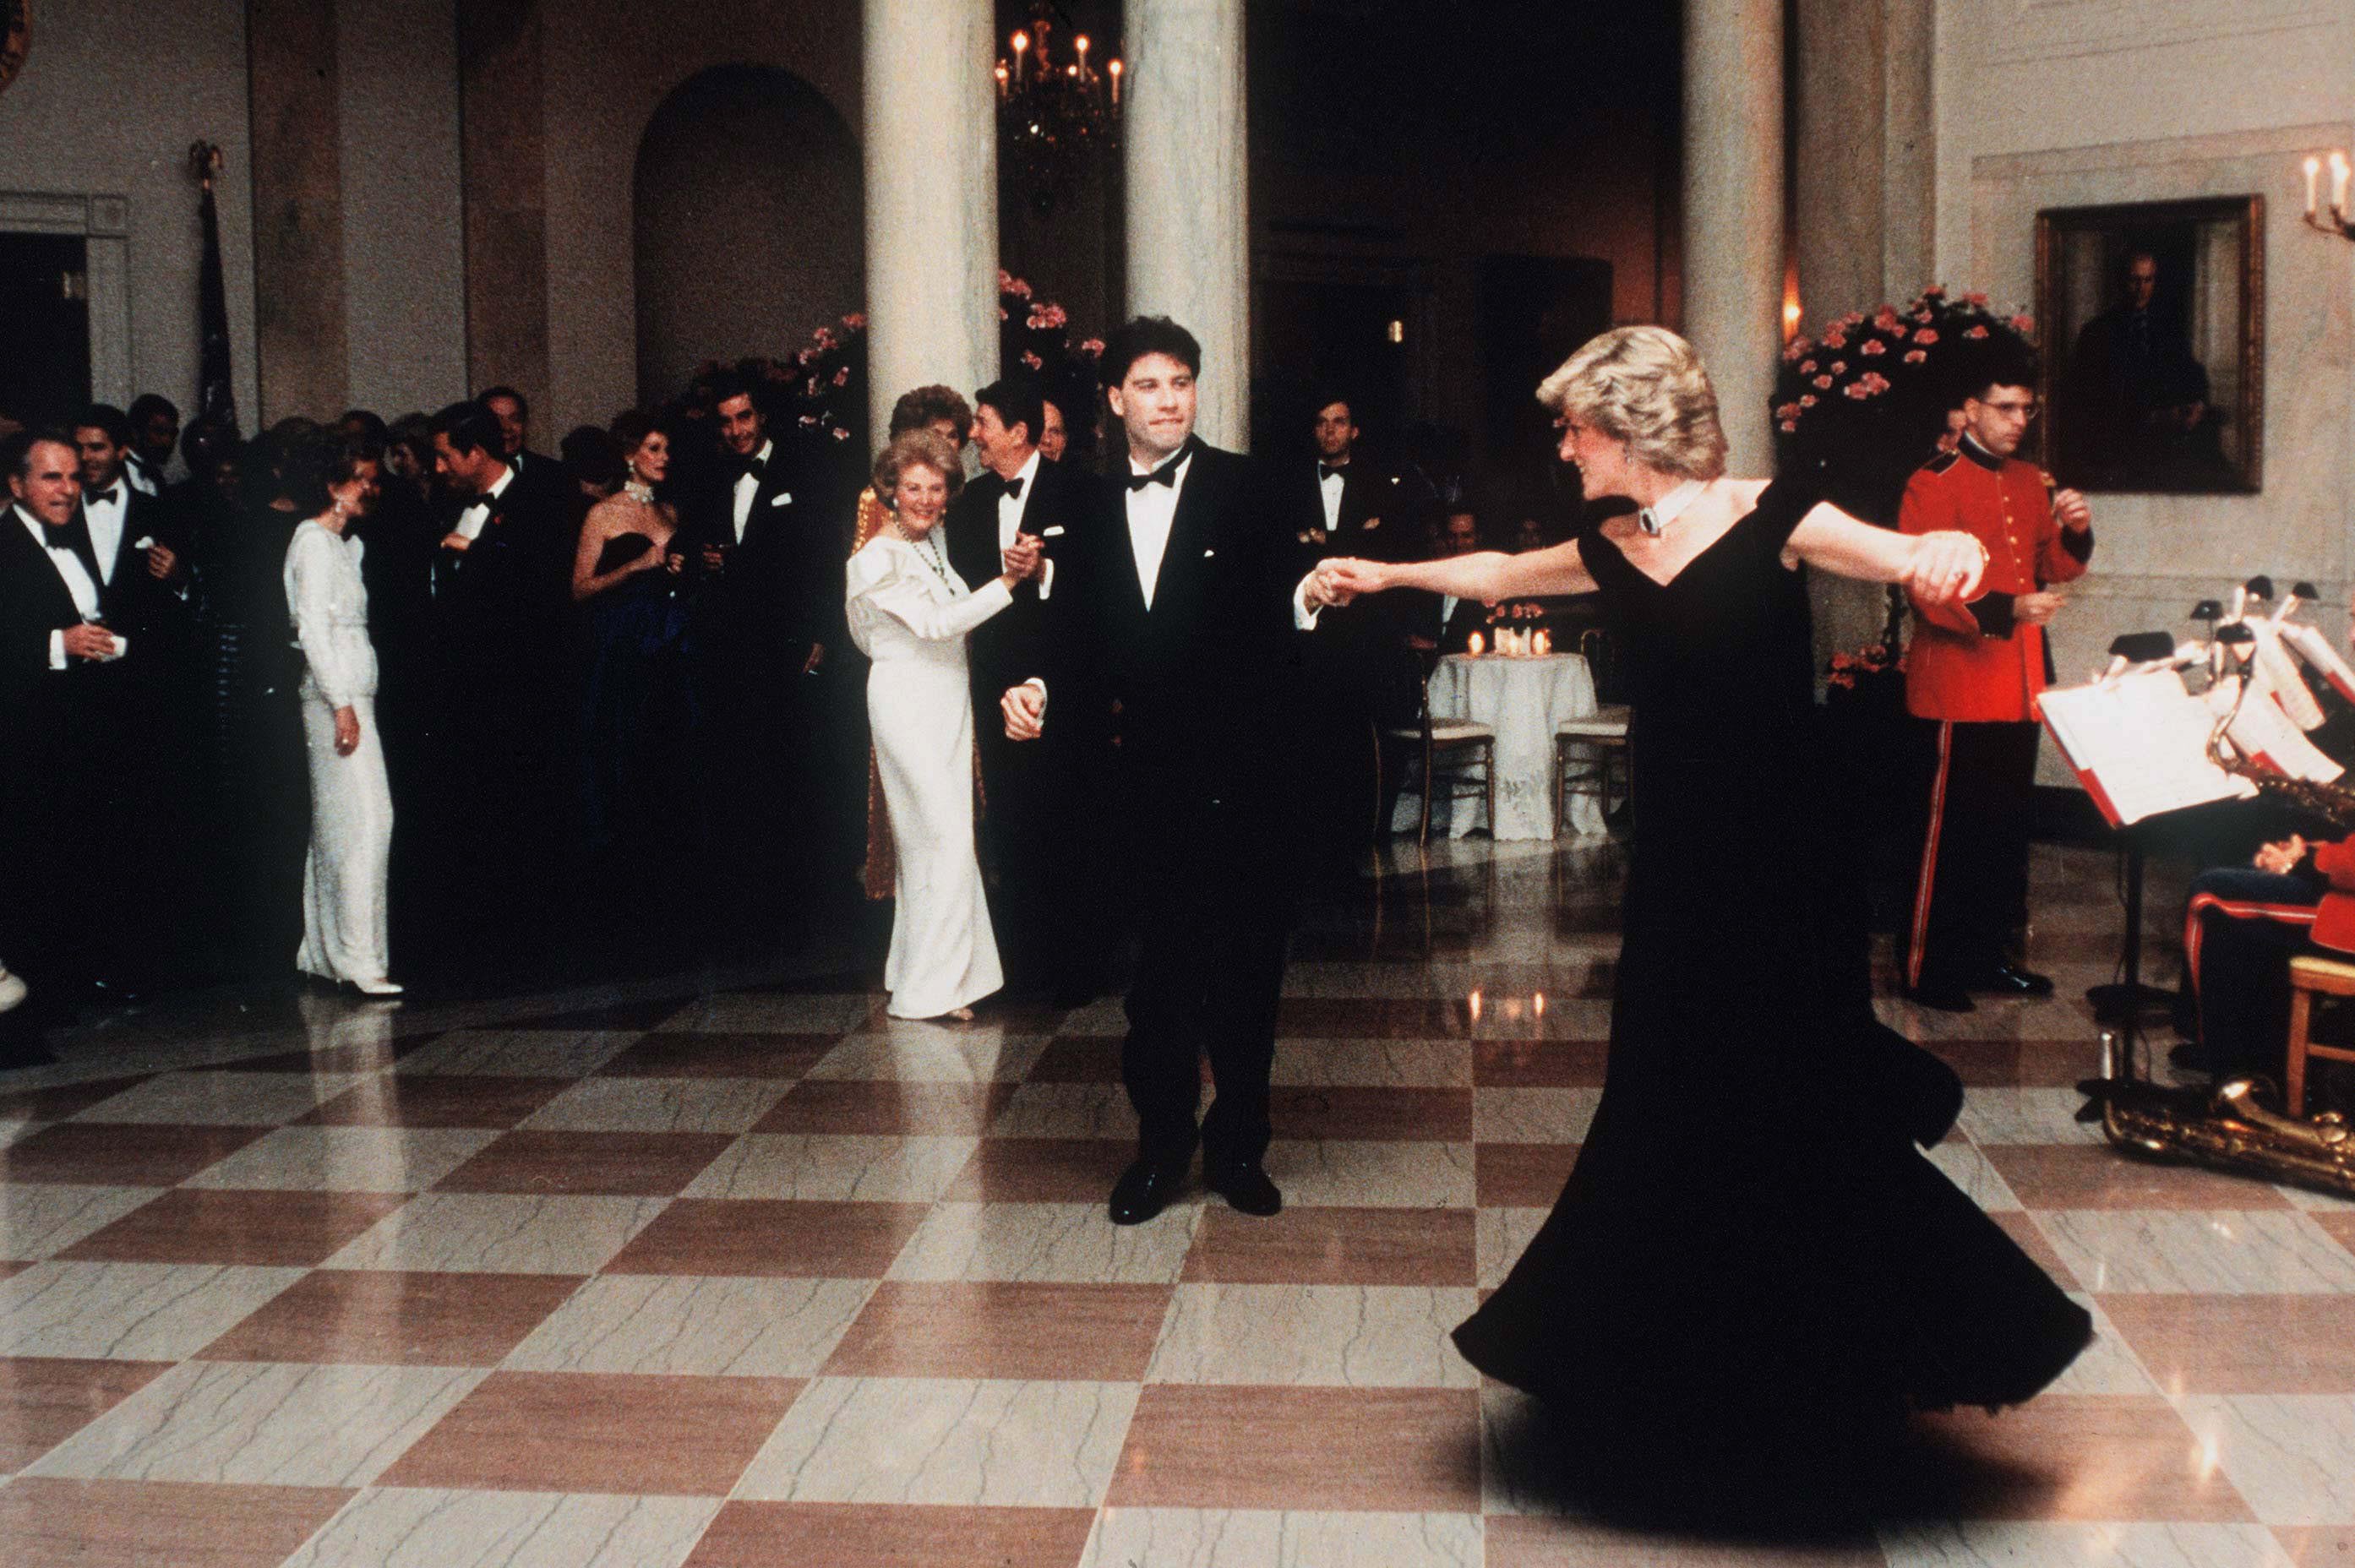 Diana, Princess Of Wales, watched by President Ronald Reagan and wife Nancy, dances with John Travolta at the White House, USA on November 9, 1985. | Photo: Getty Images